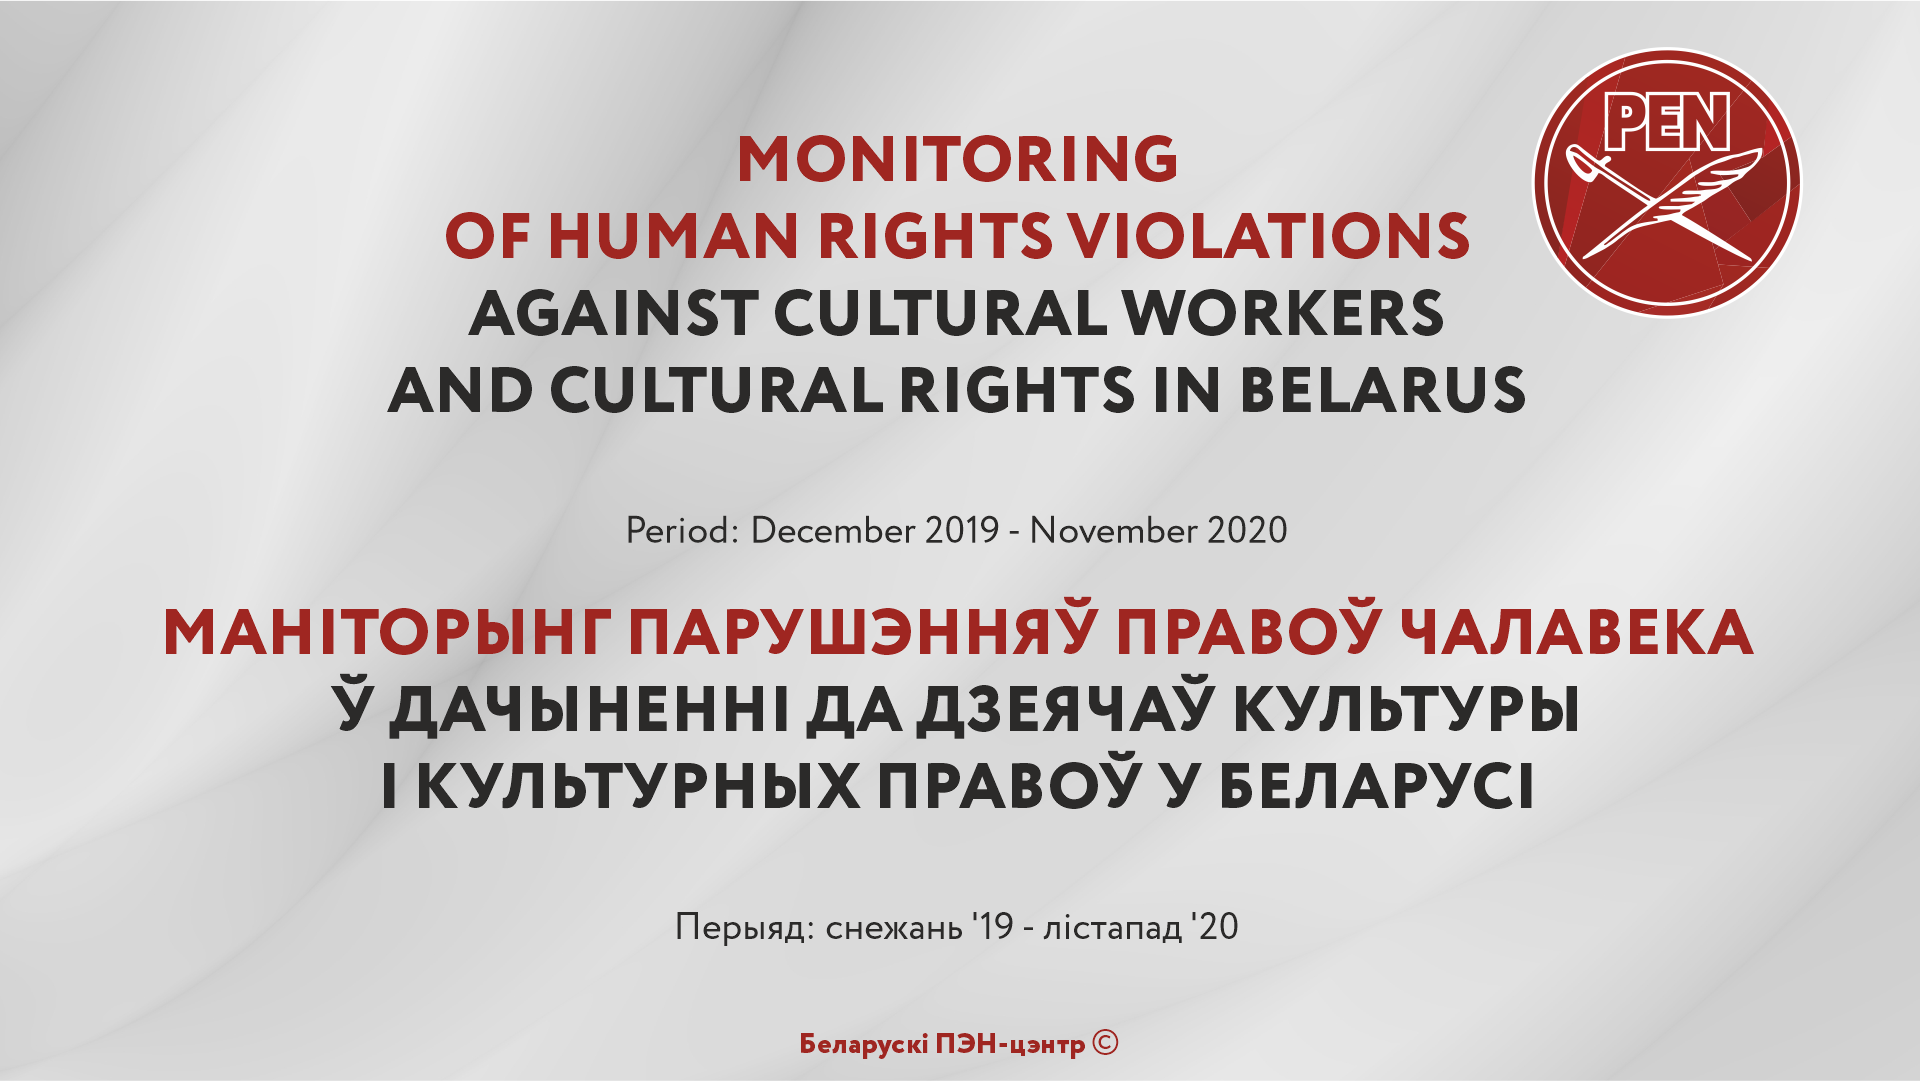 The first results of monitoring violations of cultural rights in Belarus are available